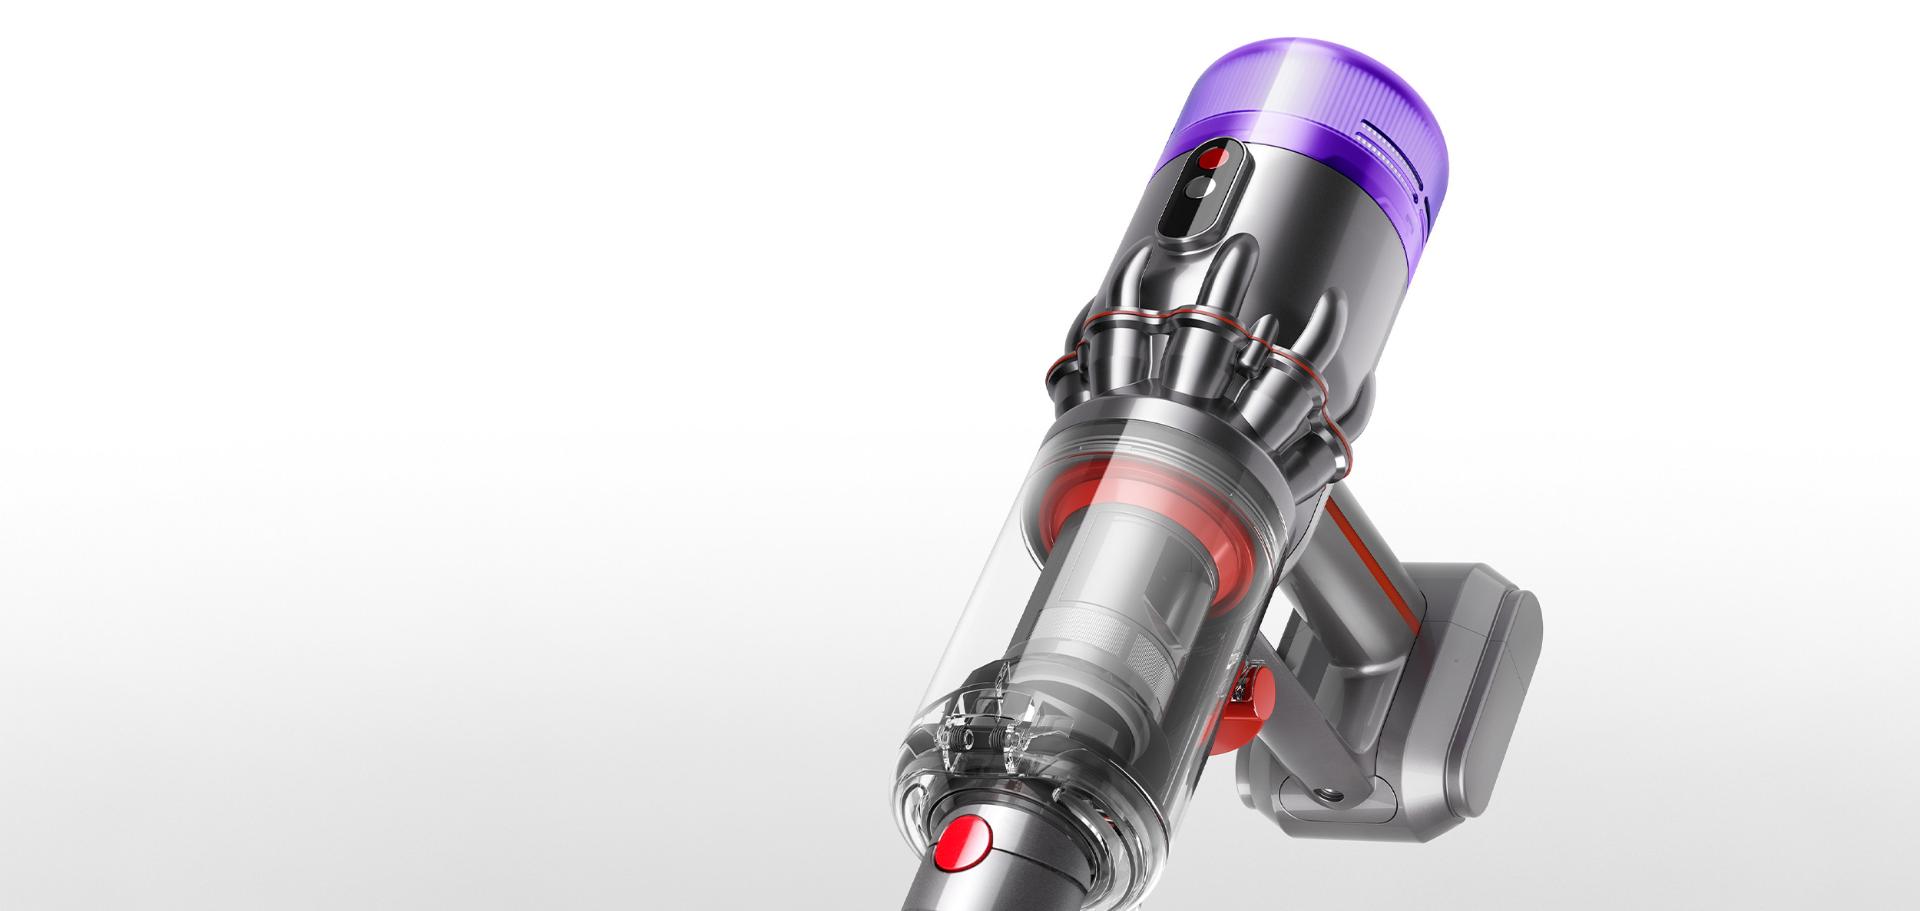 The Dyson Micro handheld vacuum shown close up.